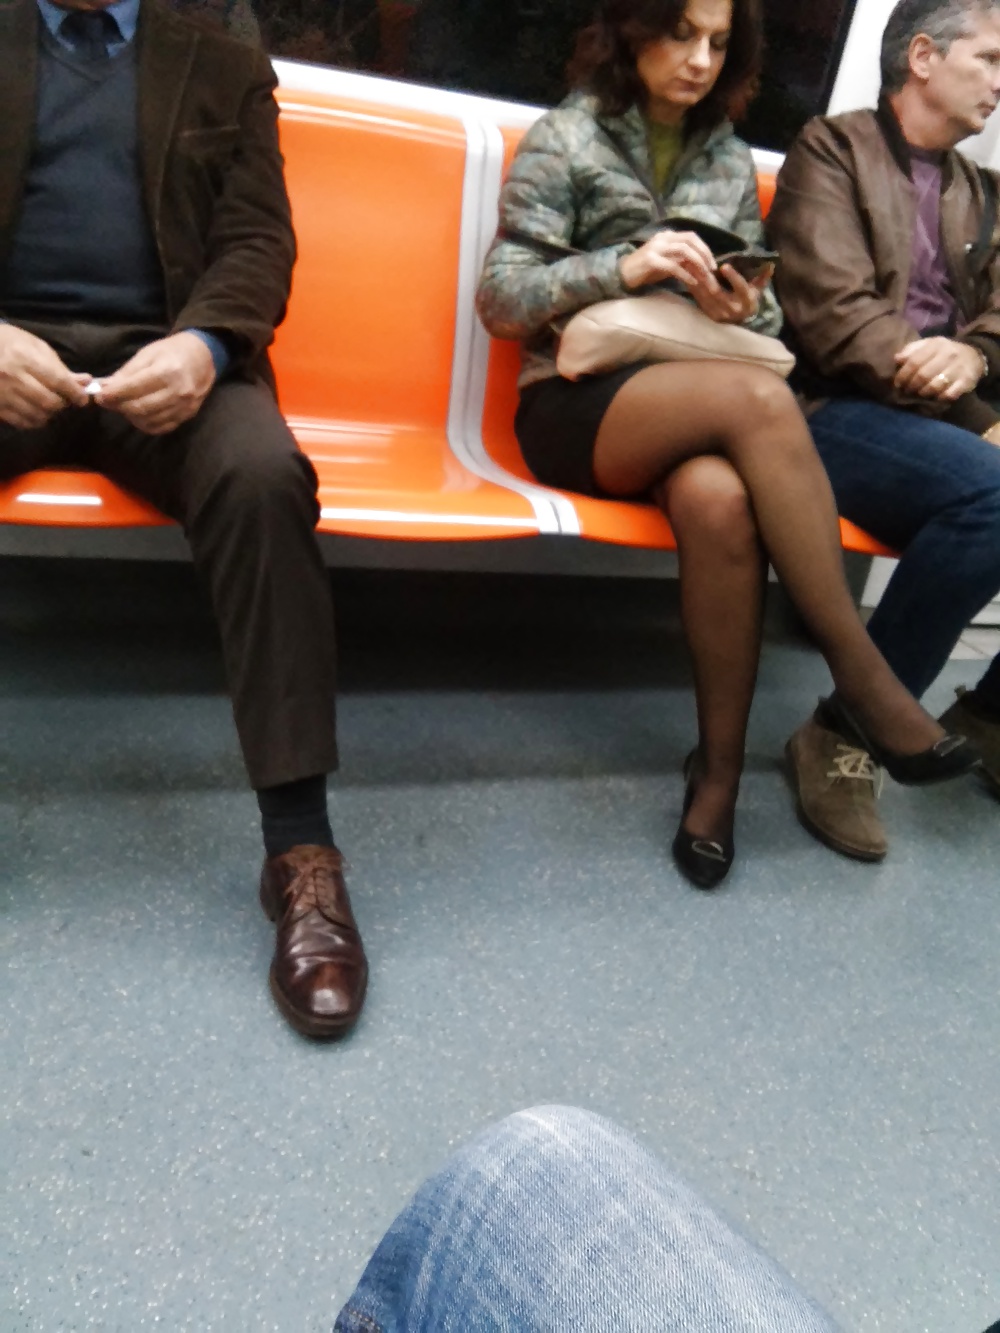 Italian (MILF) woman photographed in the subway (Italy) #31927672